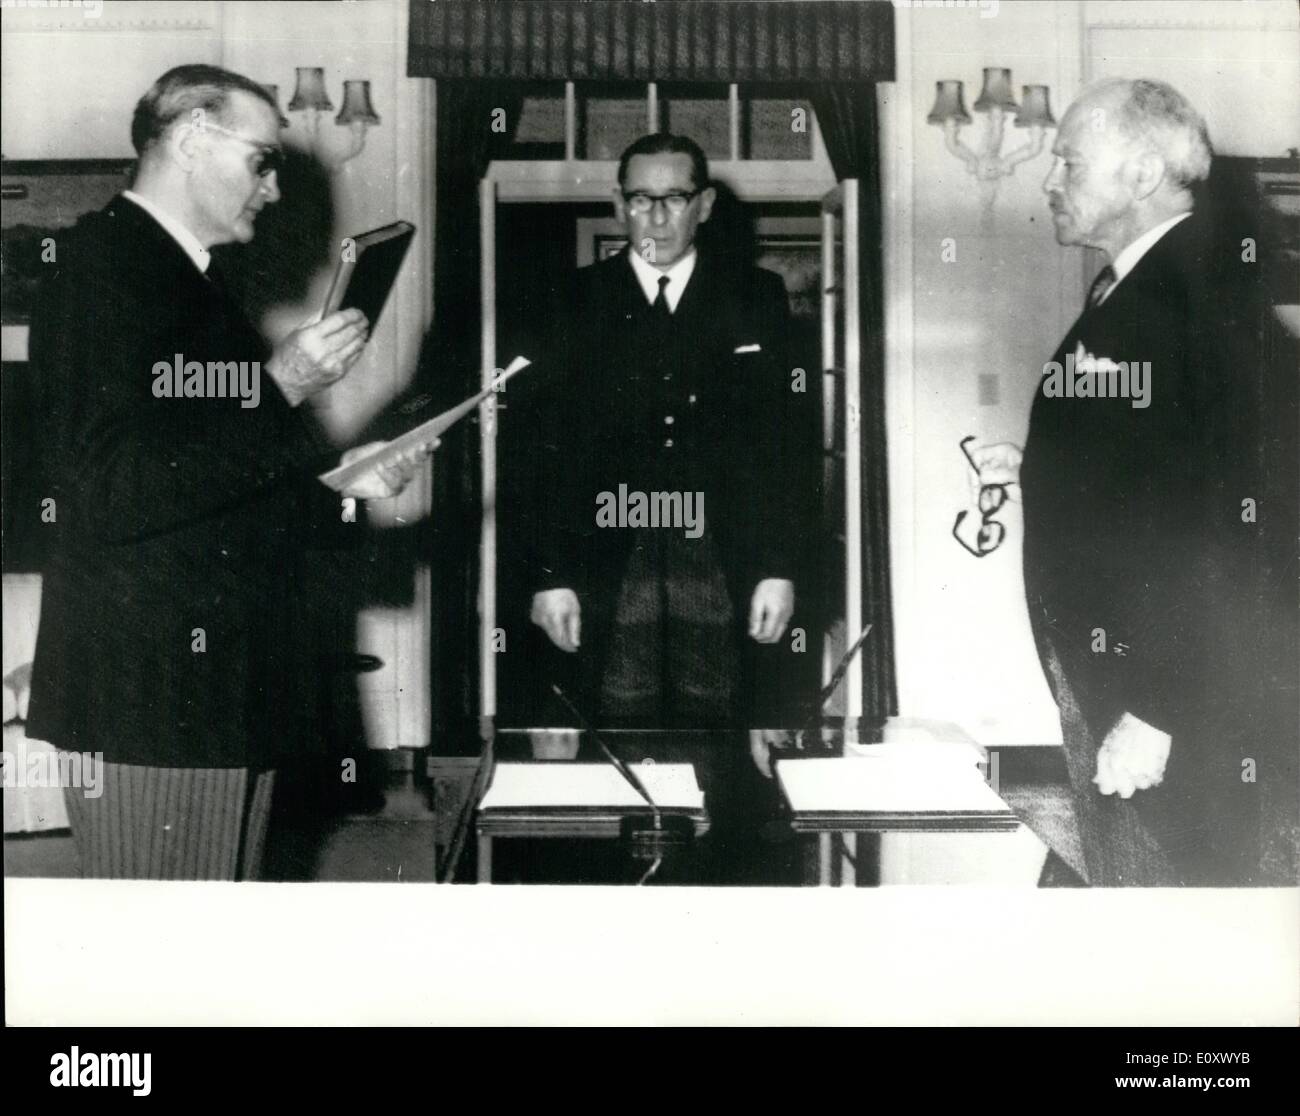 Dec. 12, 1967 - Mr. MoEwen Sworn in Canberra Swoen-in as Prime Minister, by Australia's Governor-General, Lord Casey. Mr. McEwen, Leader of the Country Party, Immediately announced he Would step aside when the Liberals, Major Partners in the ruling Coalition, Have Resolved Their Leadership Struggle, Following the Presumed death of Mr. Harold Holt. Stock Photo